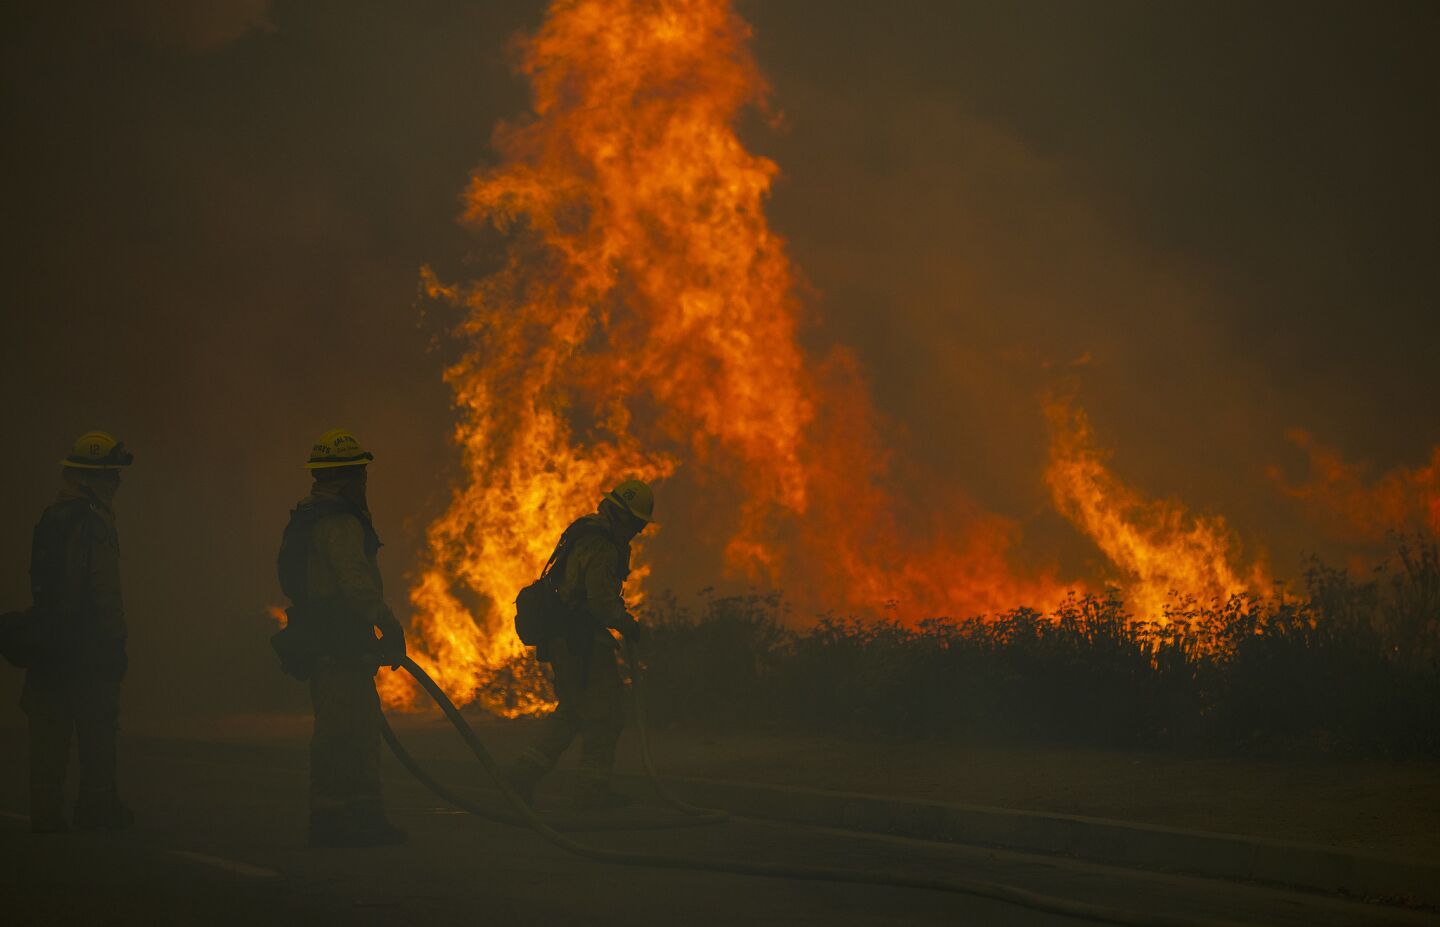 Firefighters struggle to keep the Holy fire from jumping Lincoln Street toward homes in Lake Elsinore.